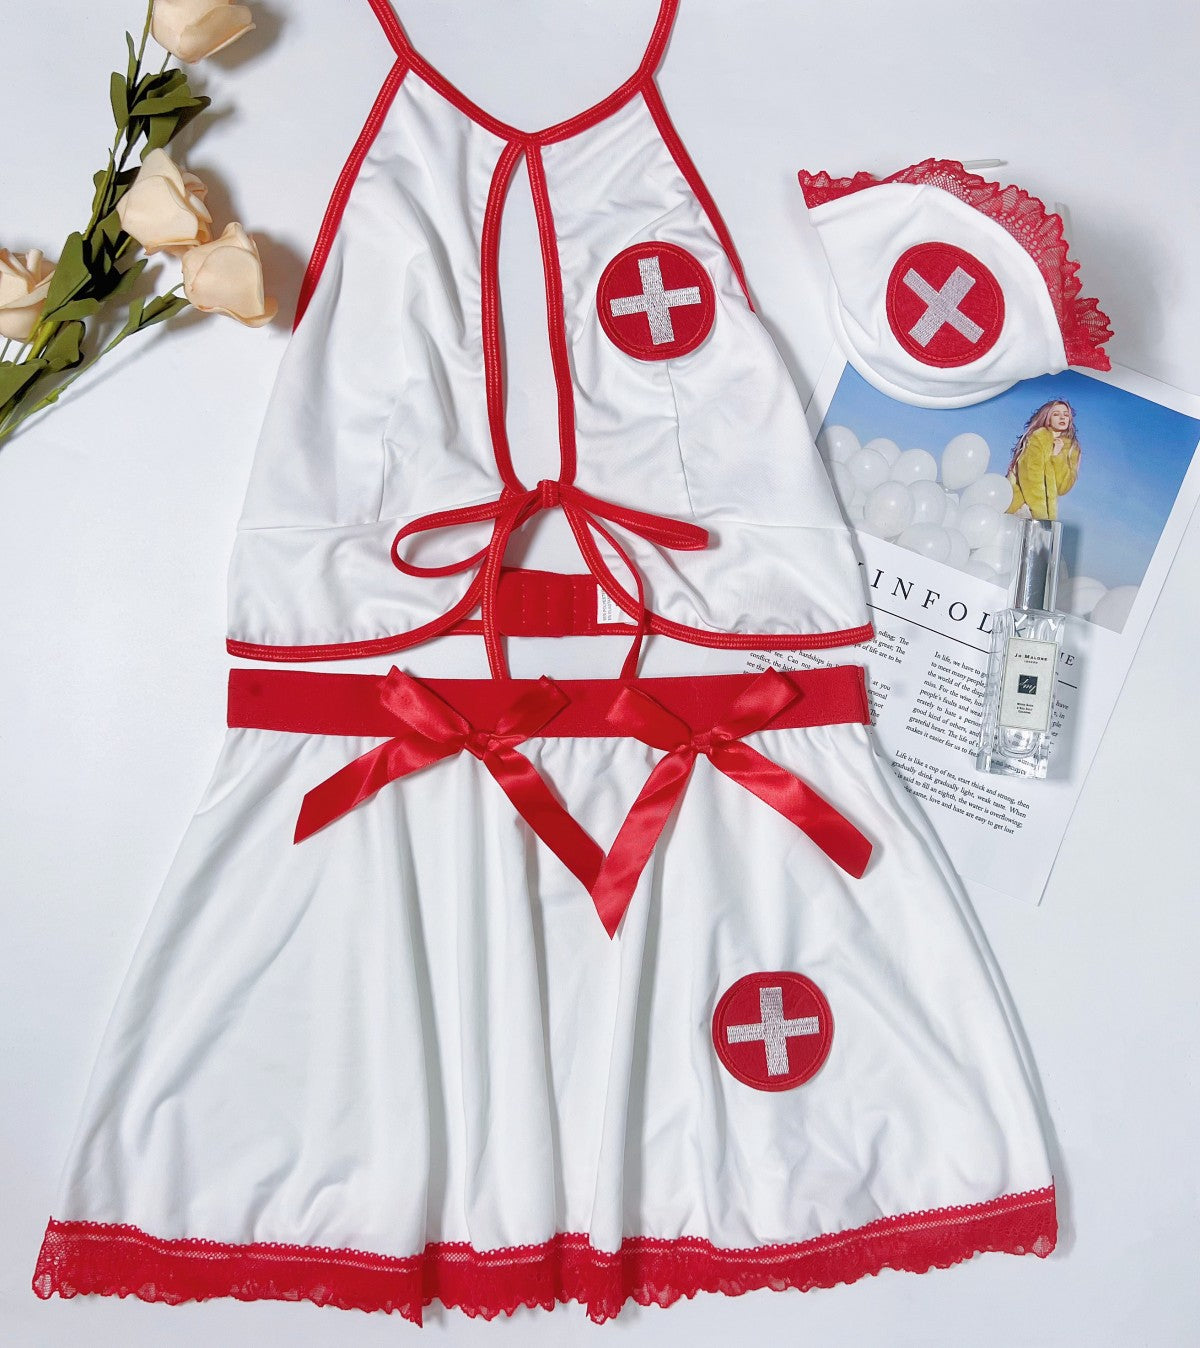 Black Lace Dress Strapy Cosplay Sexy Nurse Costume Lingerie Role Play